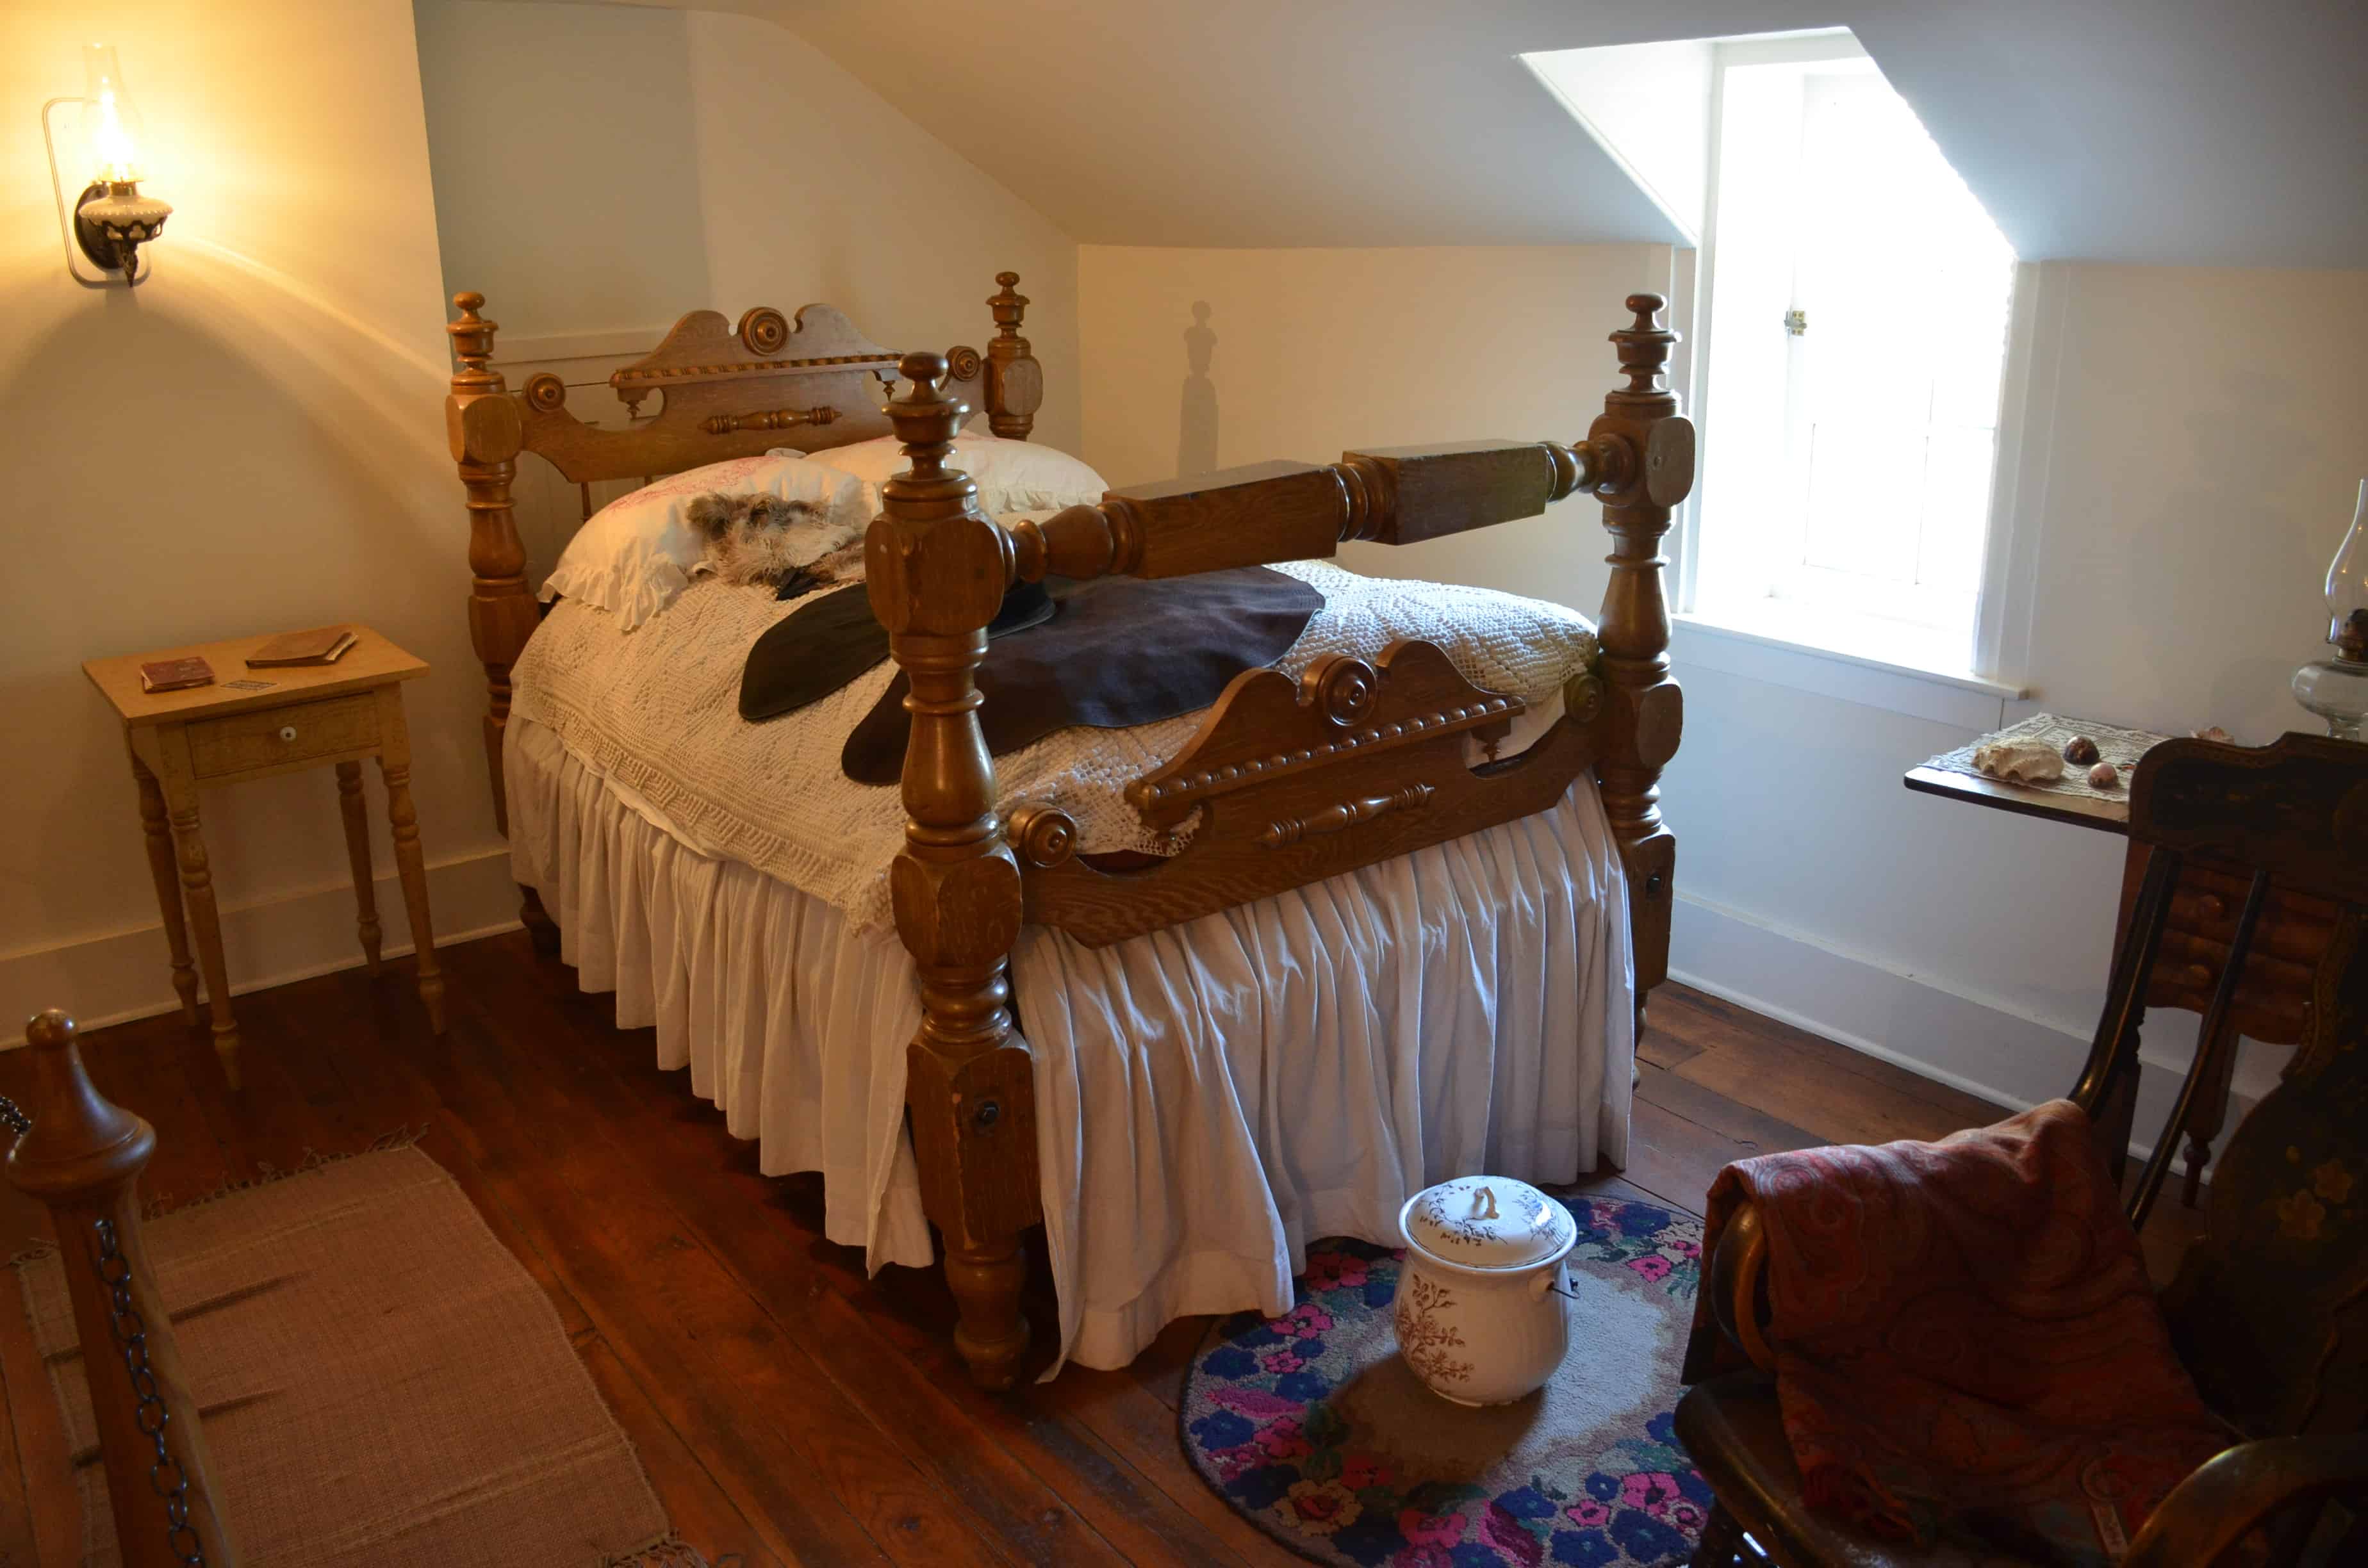 Bedroom at the Brigham Young Winter Home in St. George, Utah